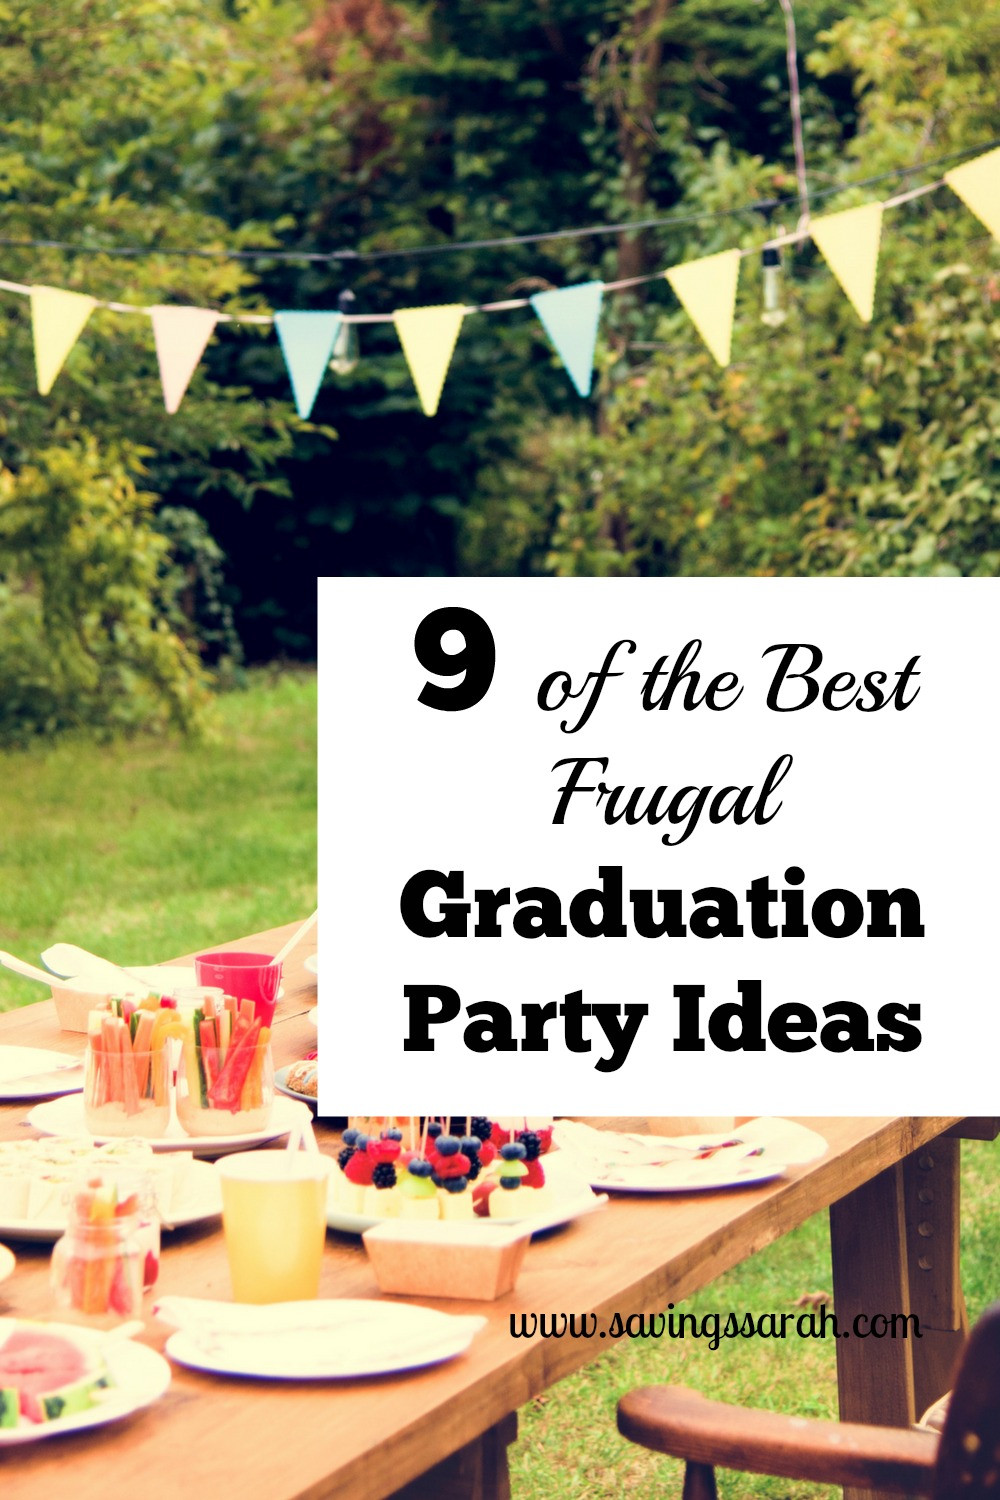 Graduation Party Ideas For Backyard
 9 the Best Frugal Graduation Party Ideas Earning and